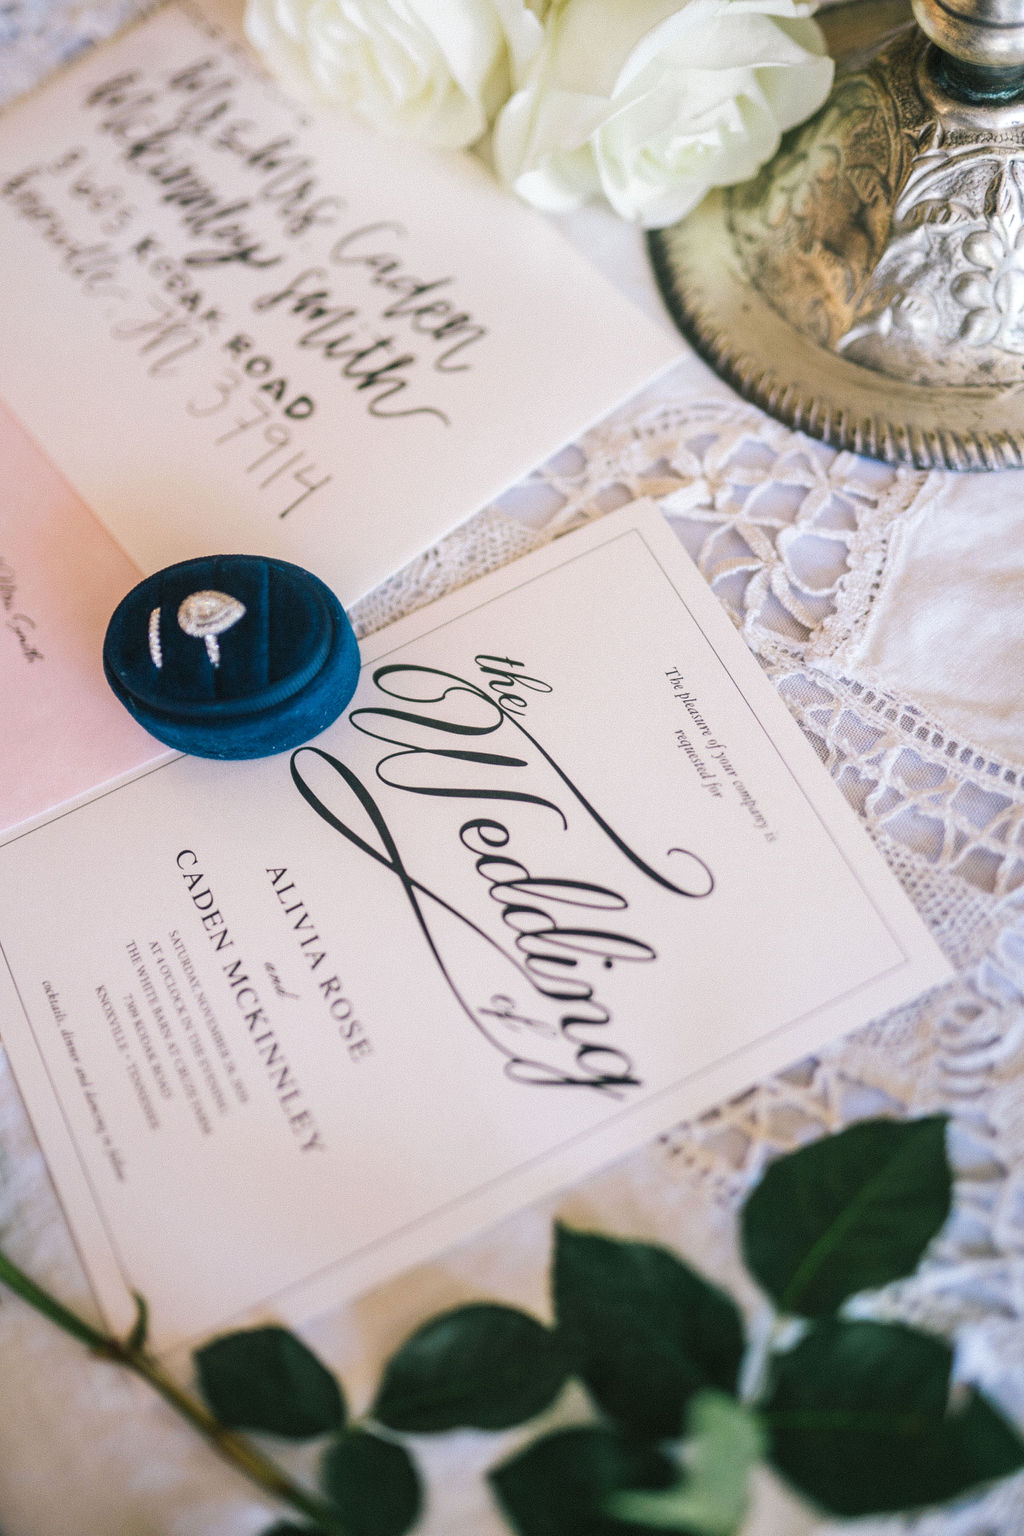 plan a smoky mountain wedding in 6 months with many deats and invitation detail shots